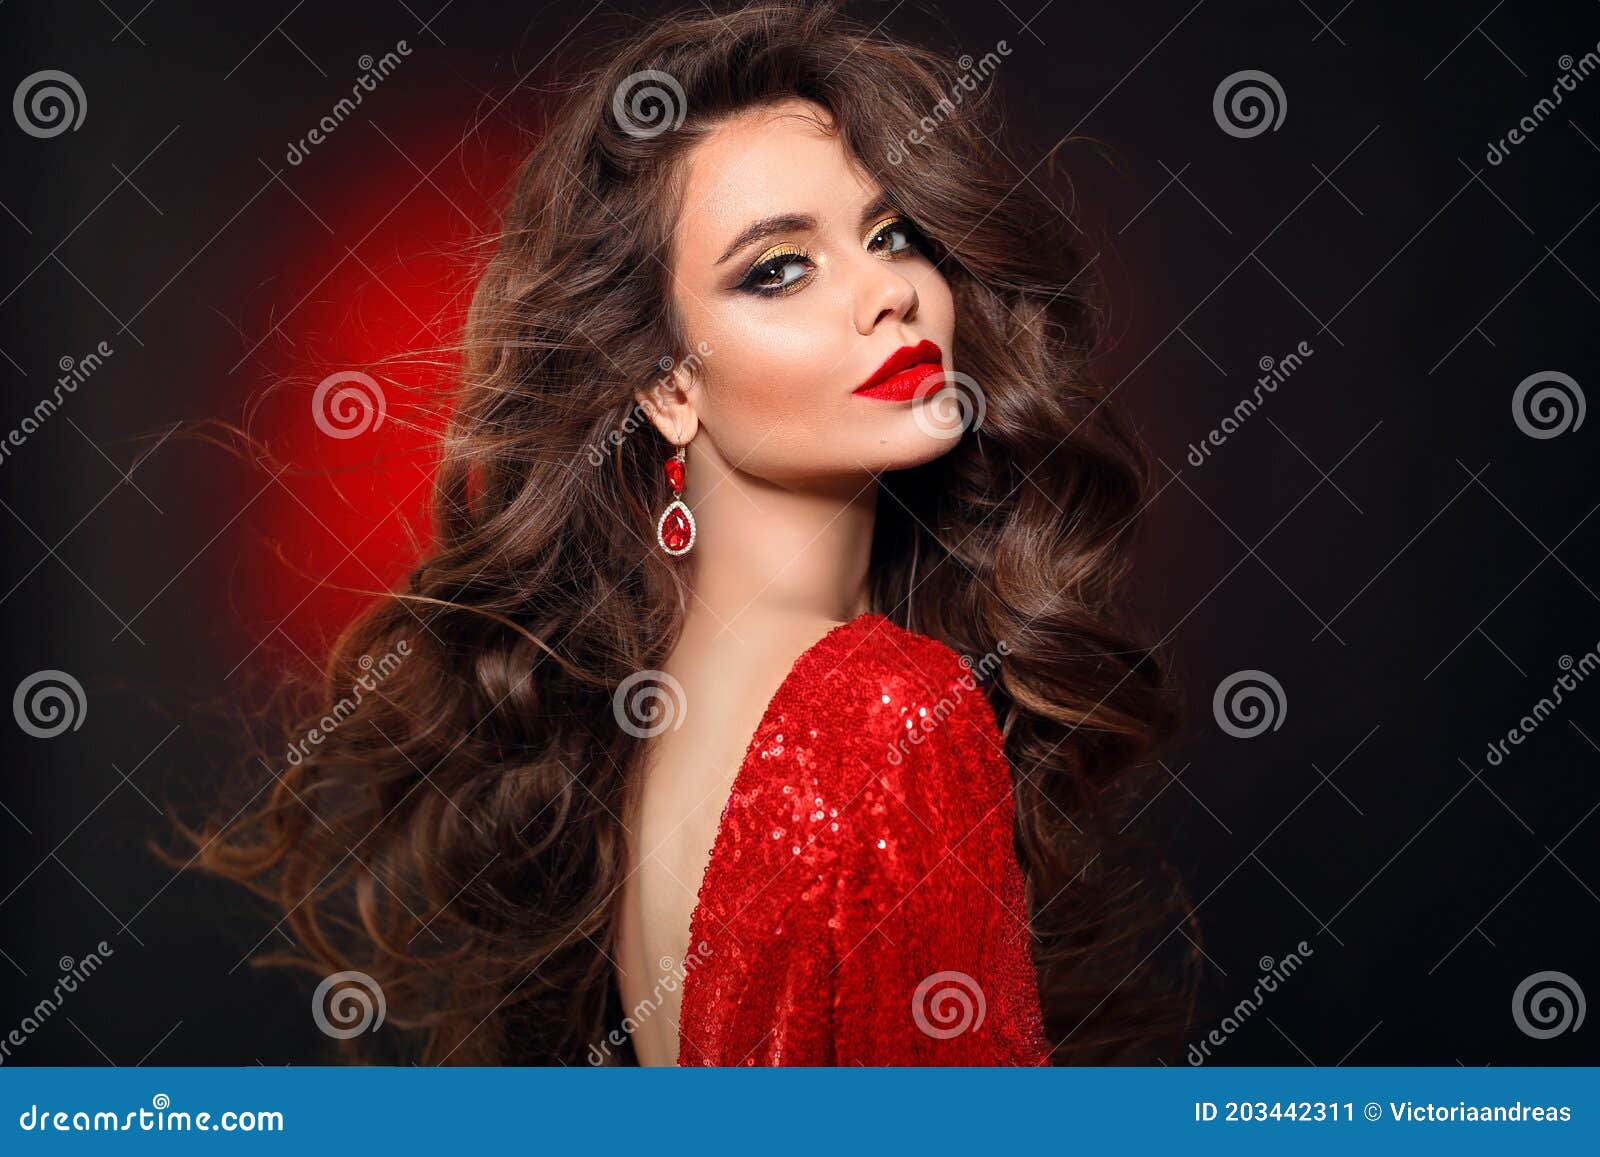 Red Beauty